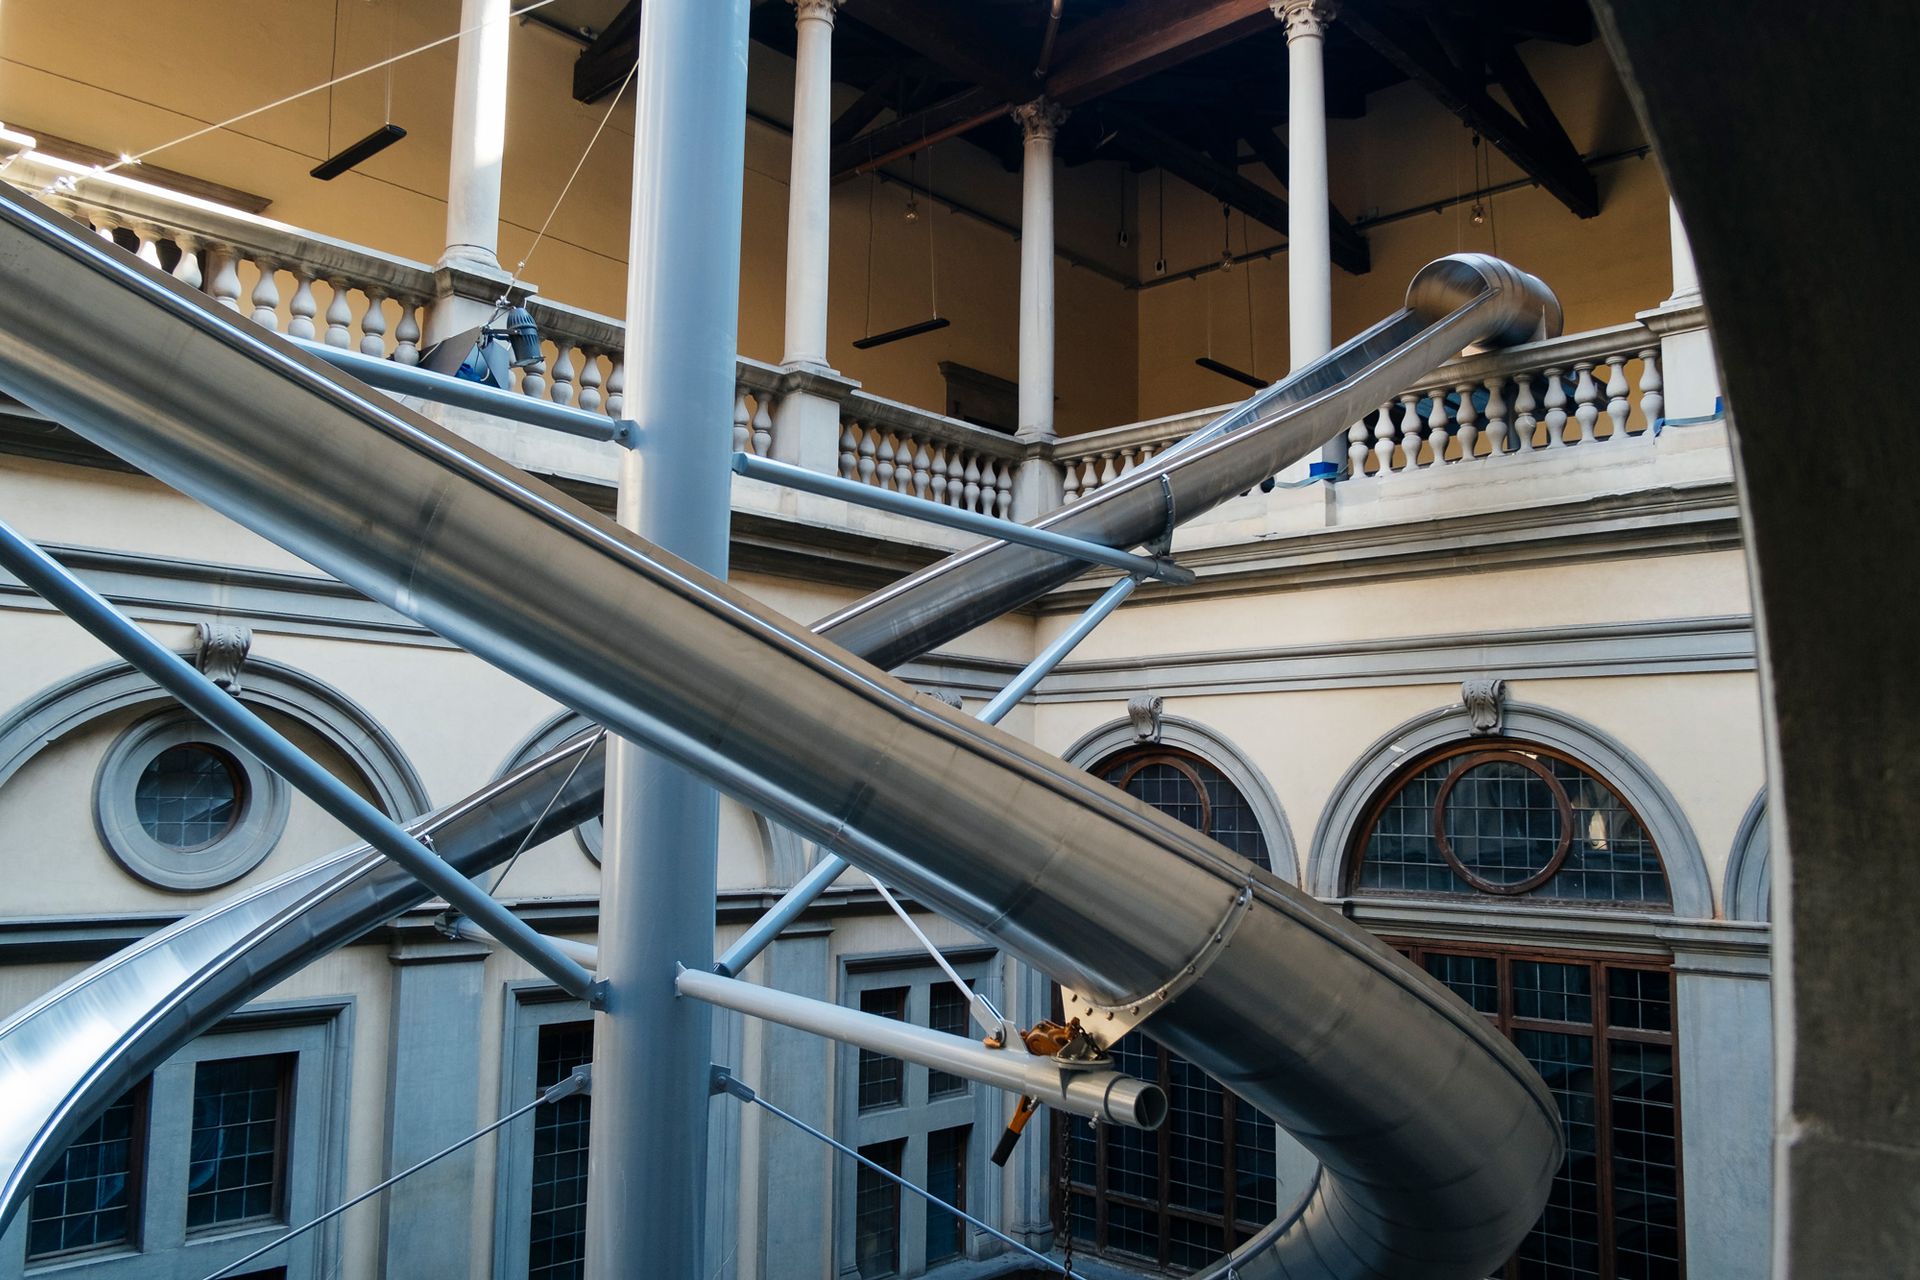 Höller wants visitors to descend his slides at Palazzo Strozzi while carrying a bean plant Martino Margheri